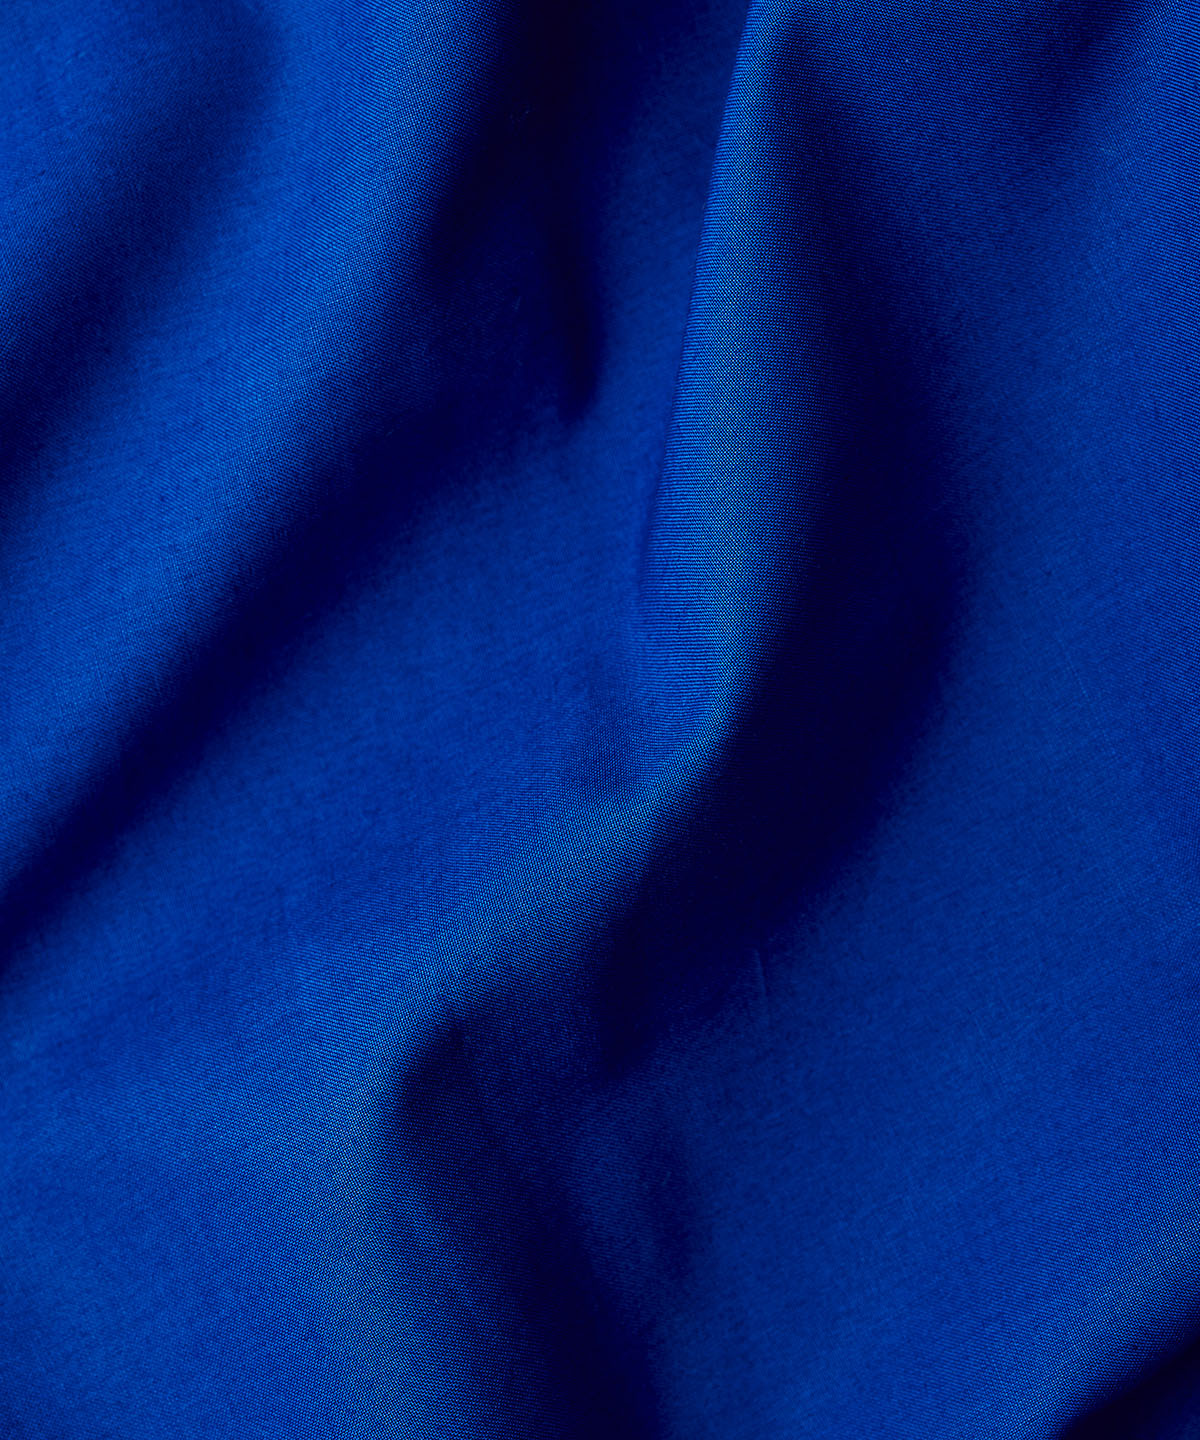 Bright blue bed linen close up fabric